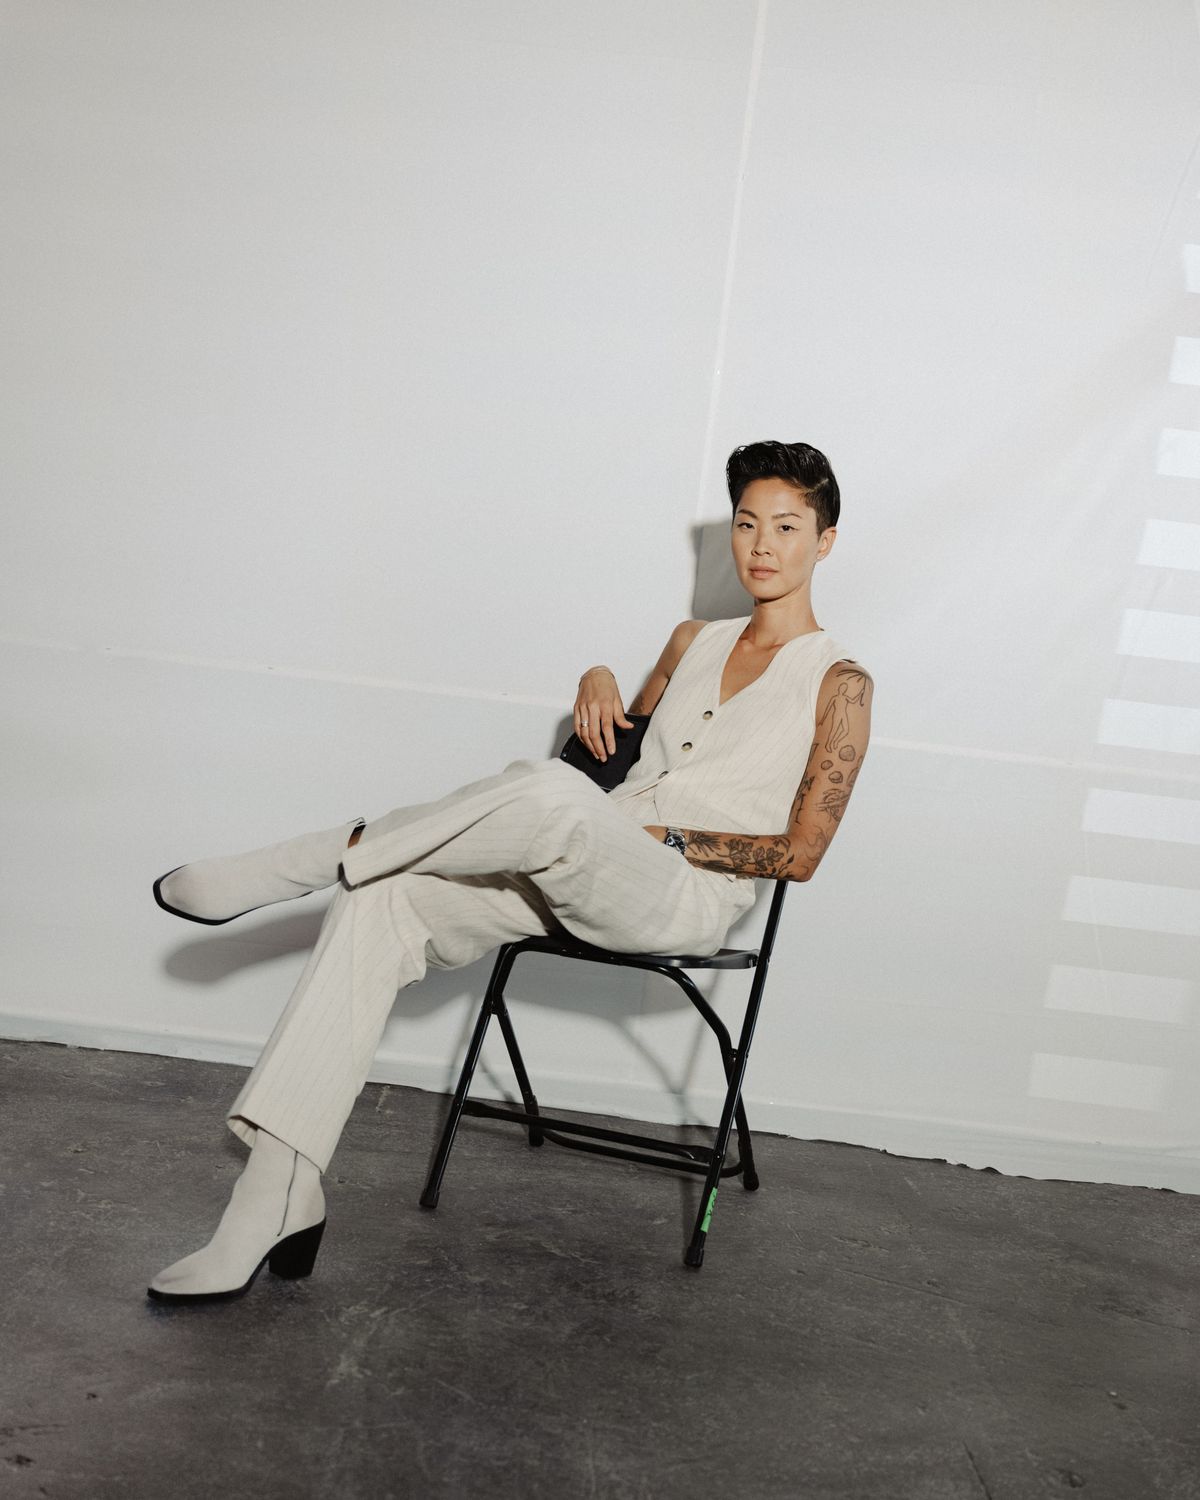 Kristen Kish, the former “Top Chef” champion who is replacing Padma Lakshmi as the show’s permanent host, on set in Milwaukee on Aug. 16, 2023. If Kish had a brand, it might be wrapped in millennial pink and laced with the ideals of a generation that values earnestness, diversity and being nice. “I have severe social anxiety and I’m on television, which is wild,” she said. “I know I’m a walking contradiction.”  (LYNDON FRENCH/New York Times)